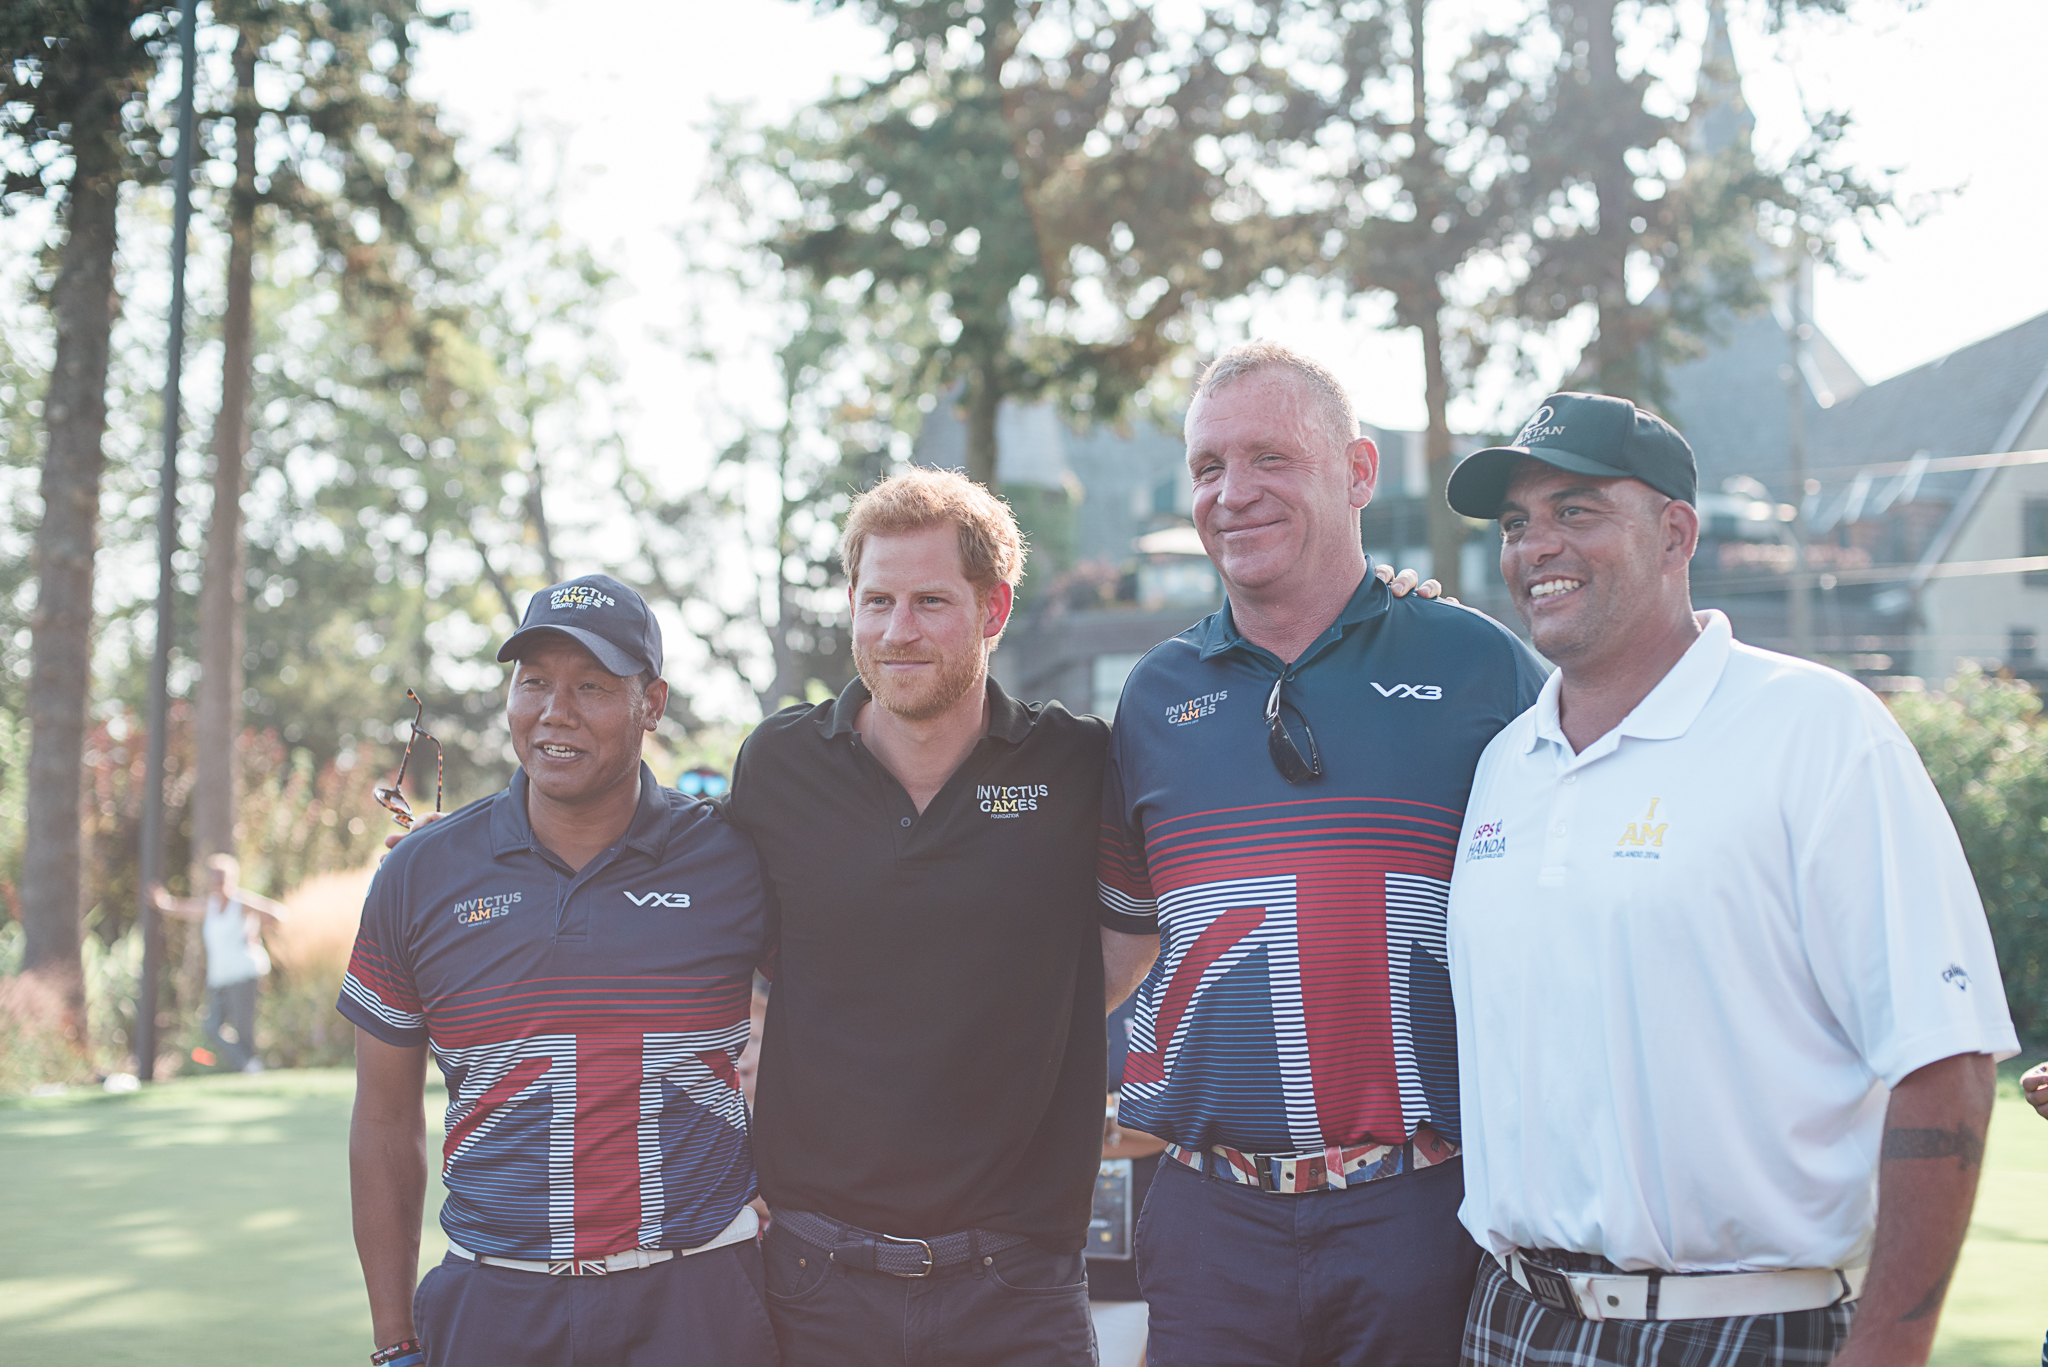 Prince Harry poses with members of the UK's Invictus Golf Team.